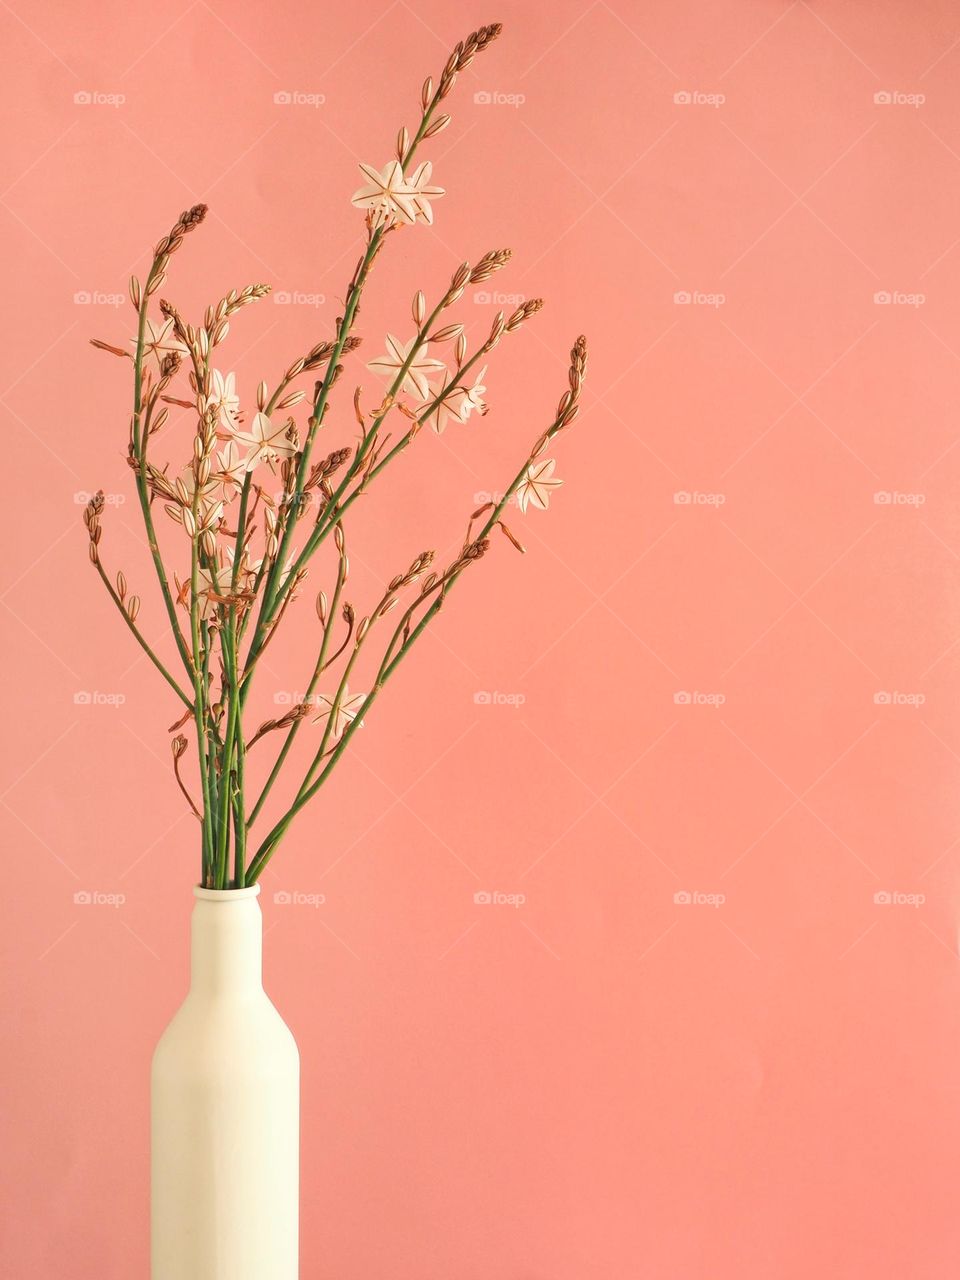 Whote vase and flowers